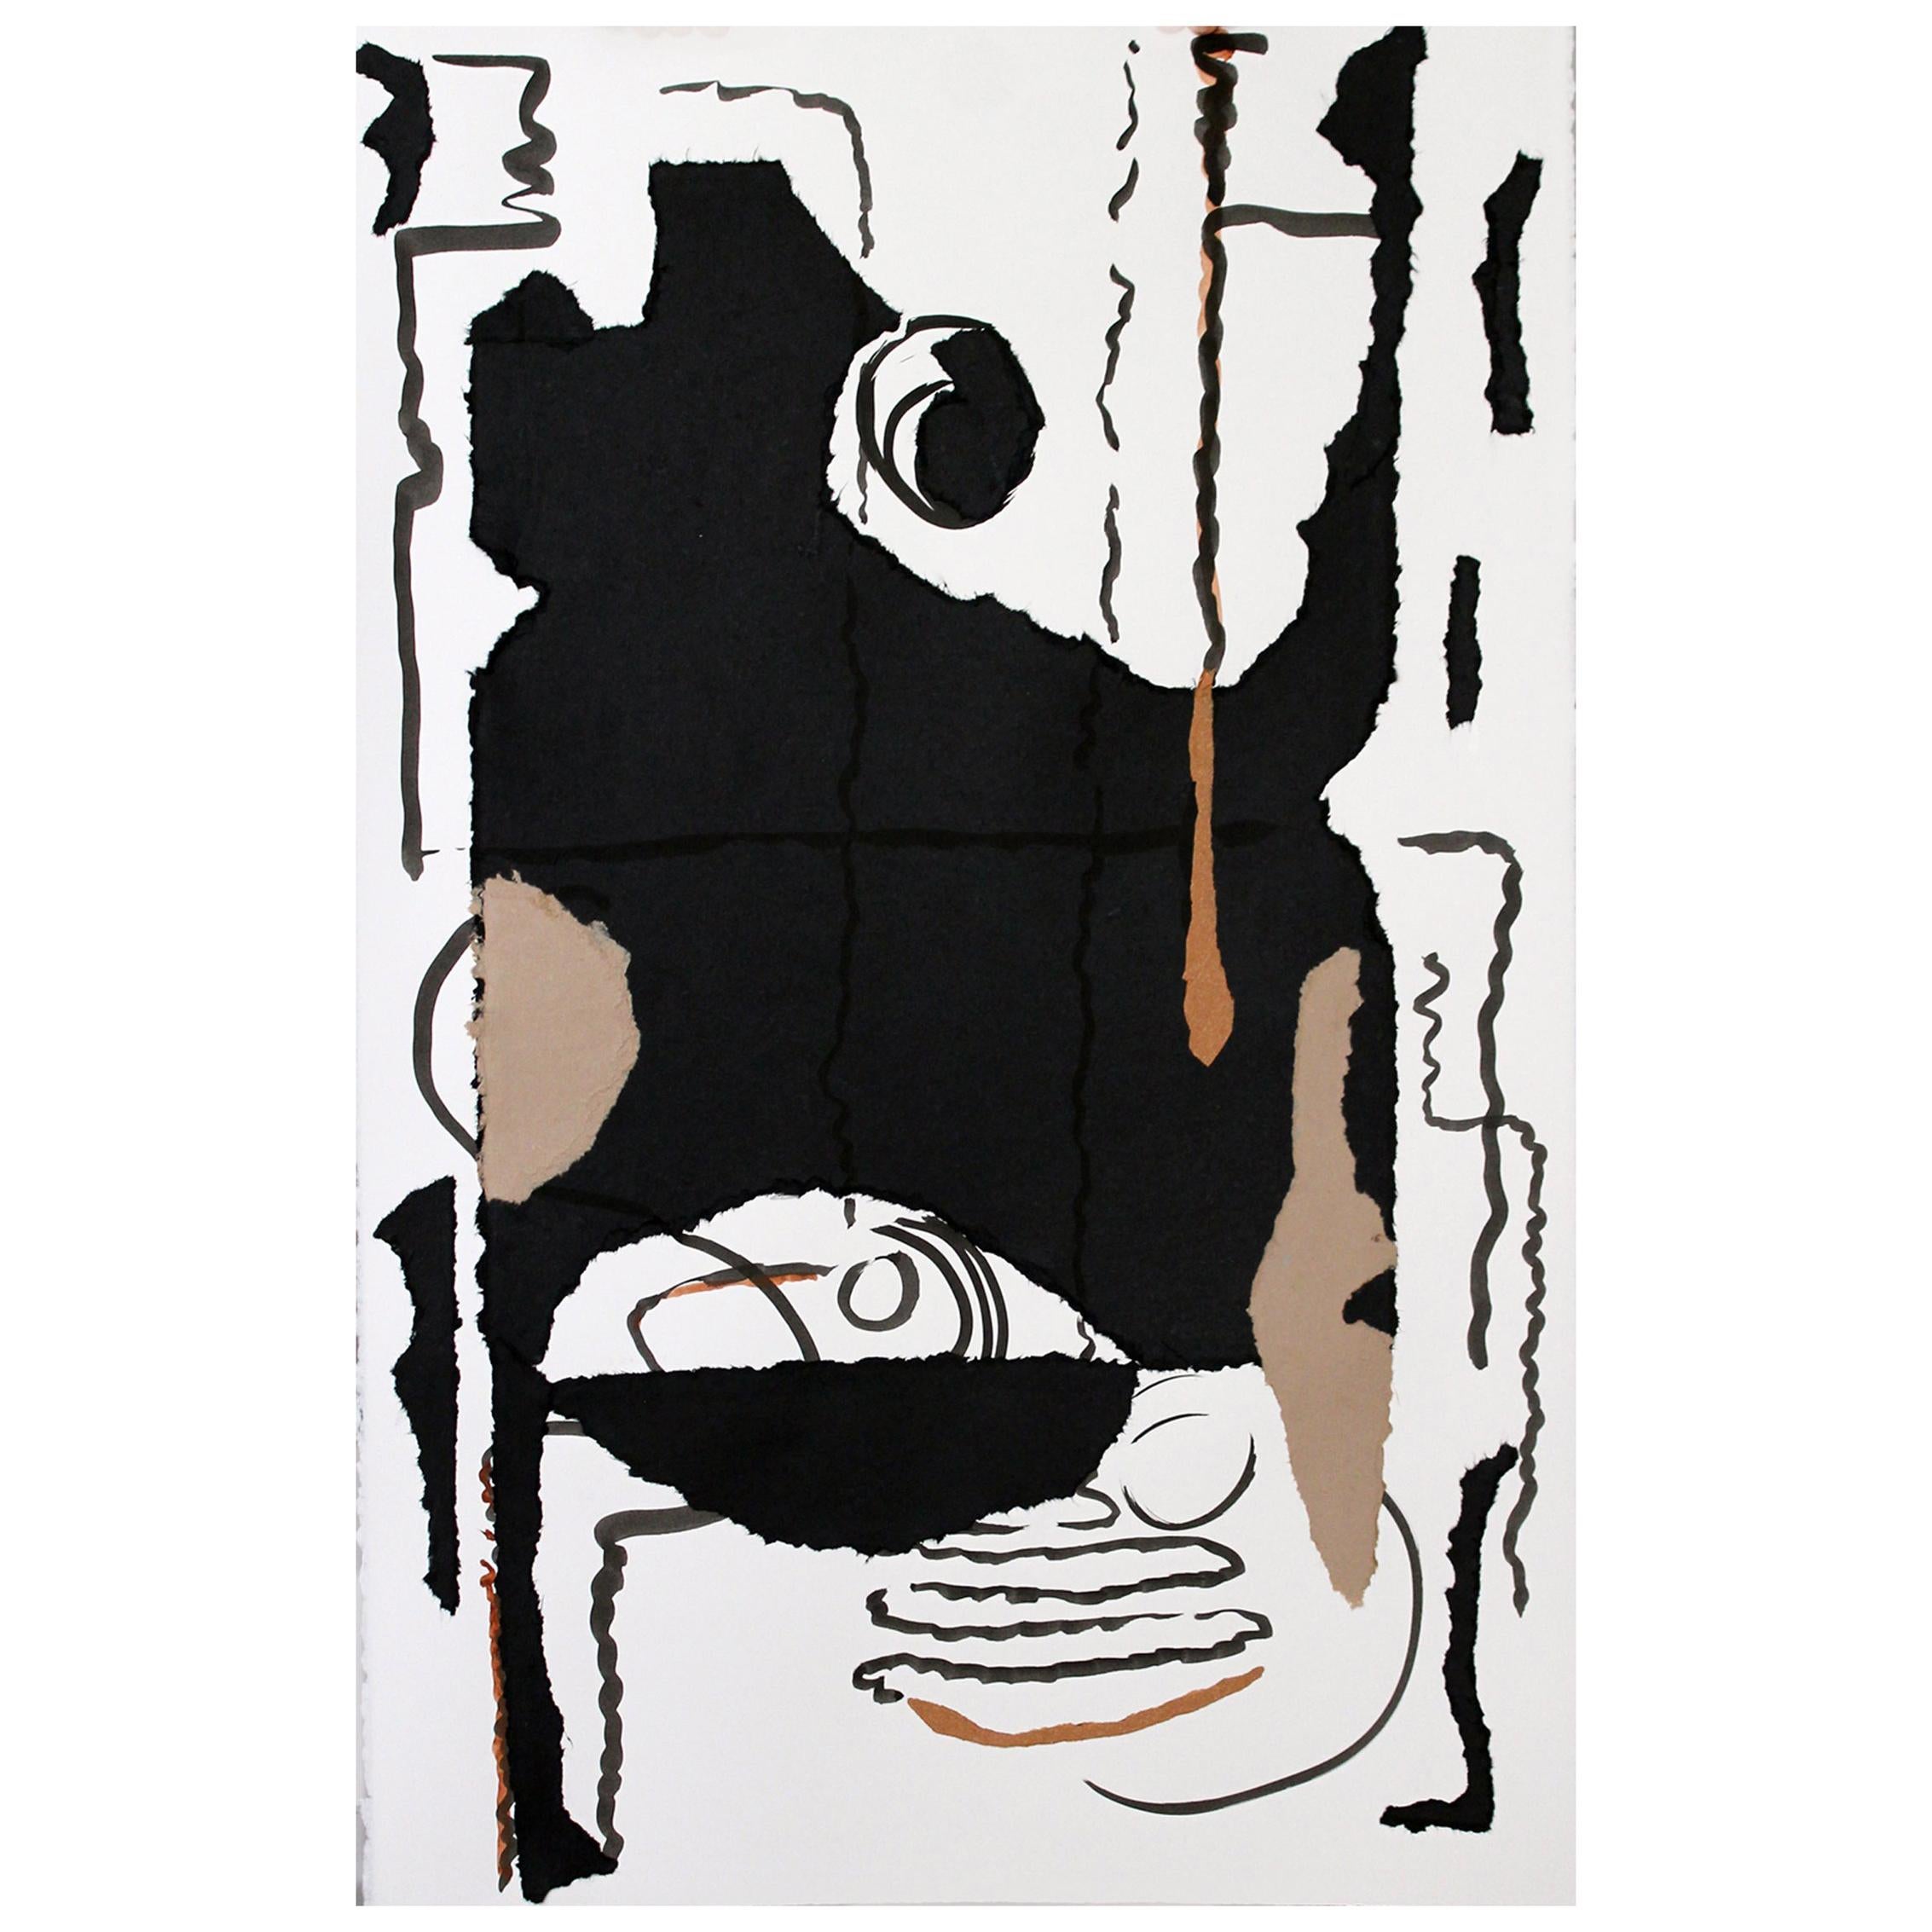 "Syncopation, " 2020 A Large Framed Black & White Abstract Collage By Diane Love